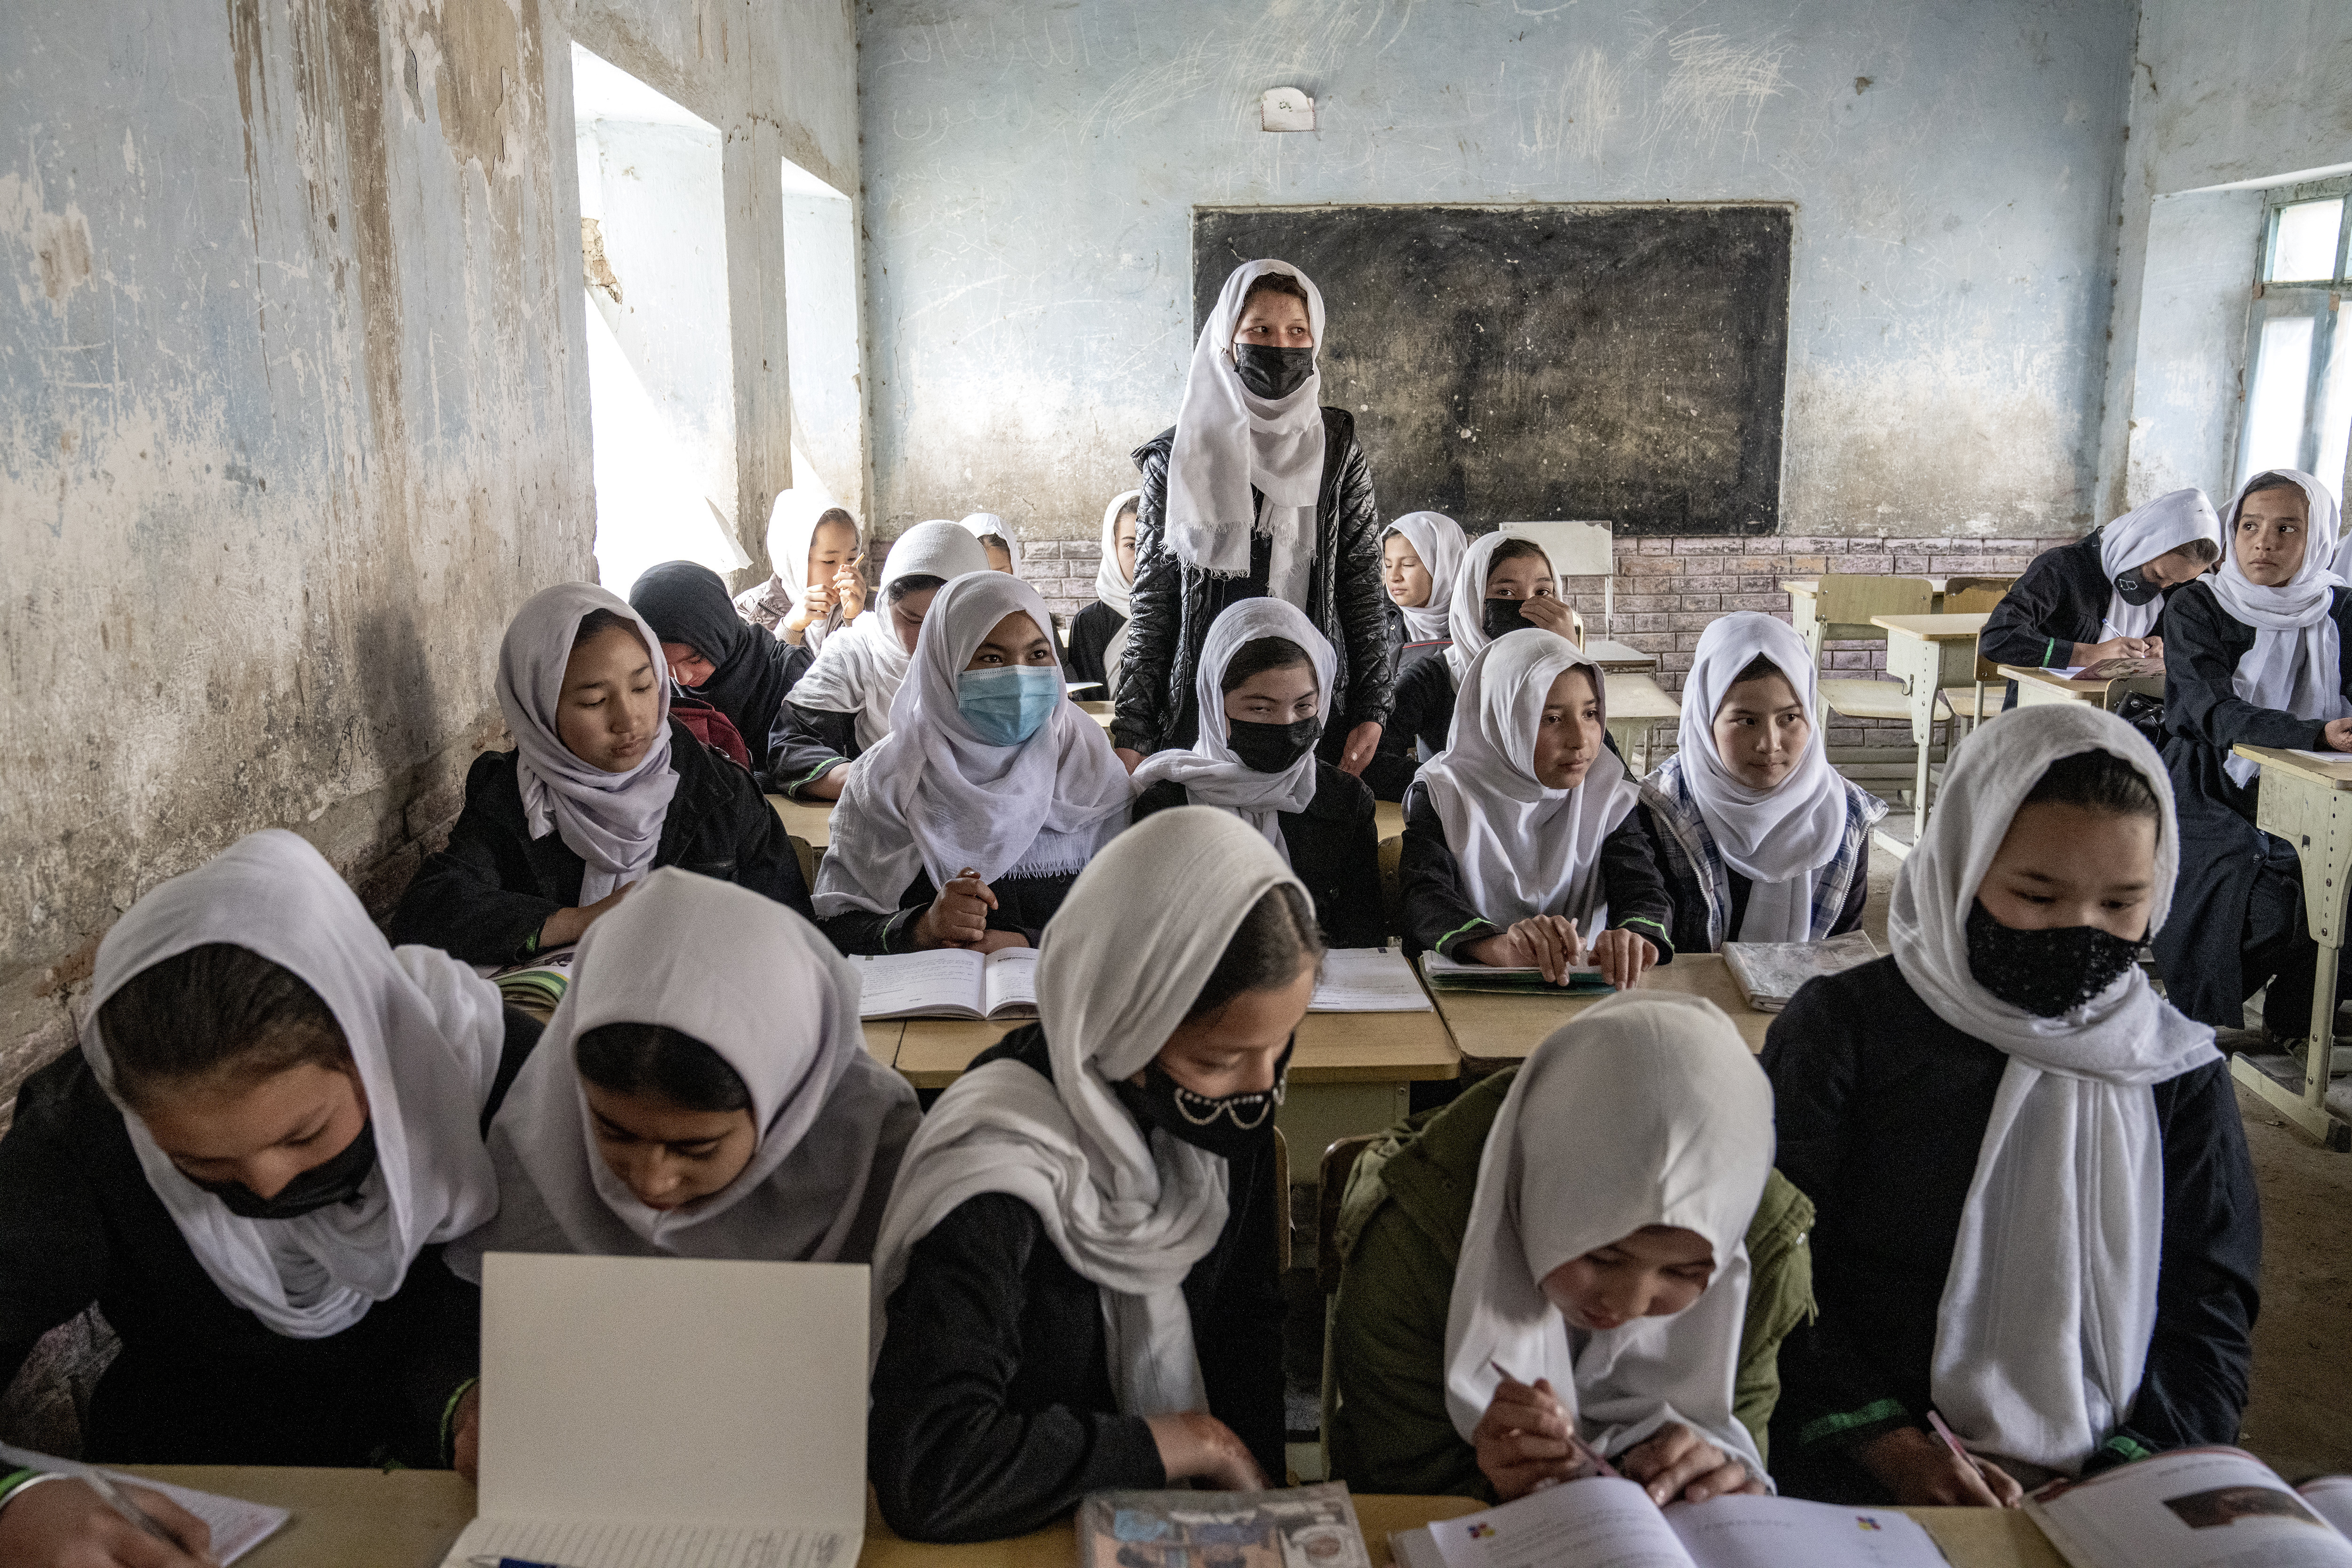 The Taliban have eliminated secondary and higher education for women and girls, denying them access to university and limiting their career options.  (AP)